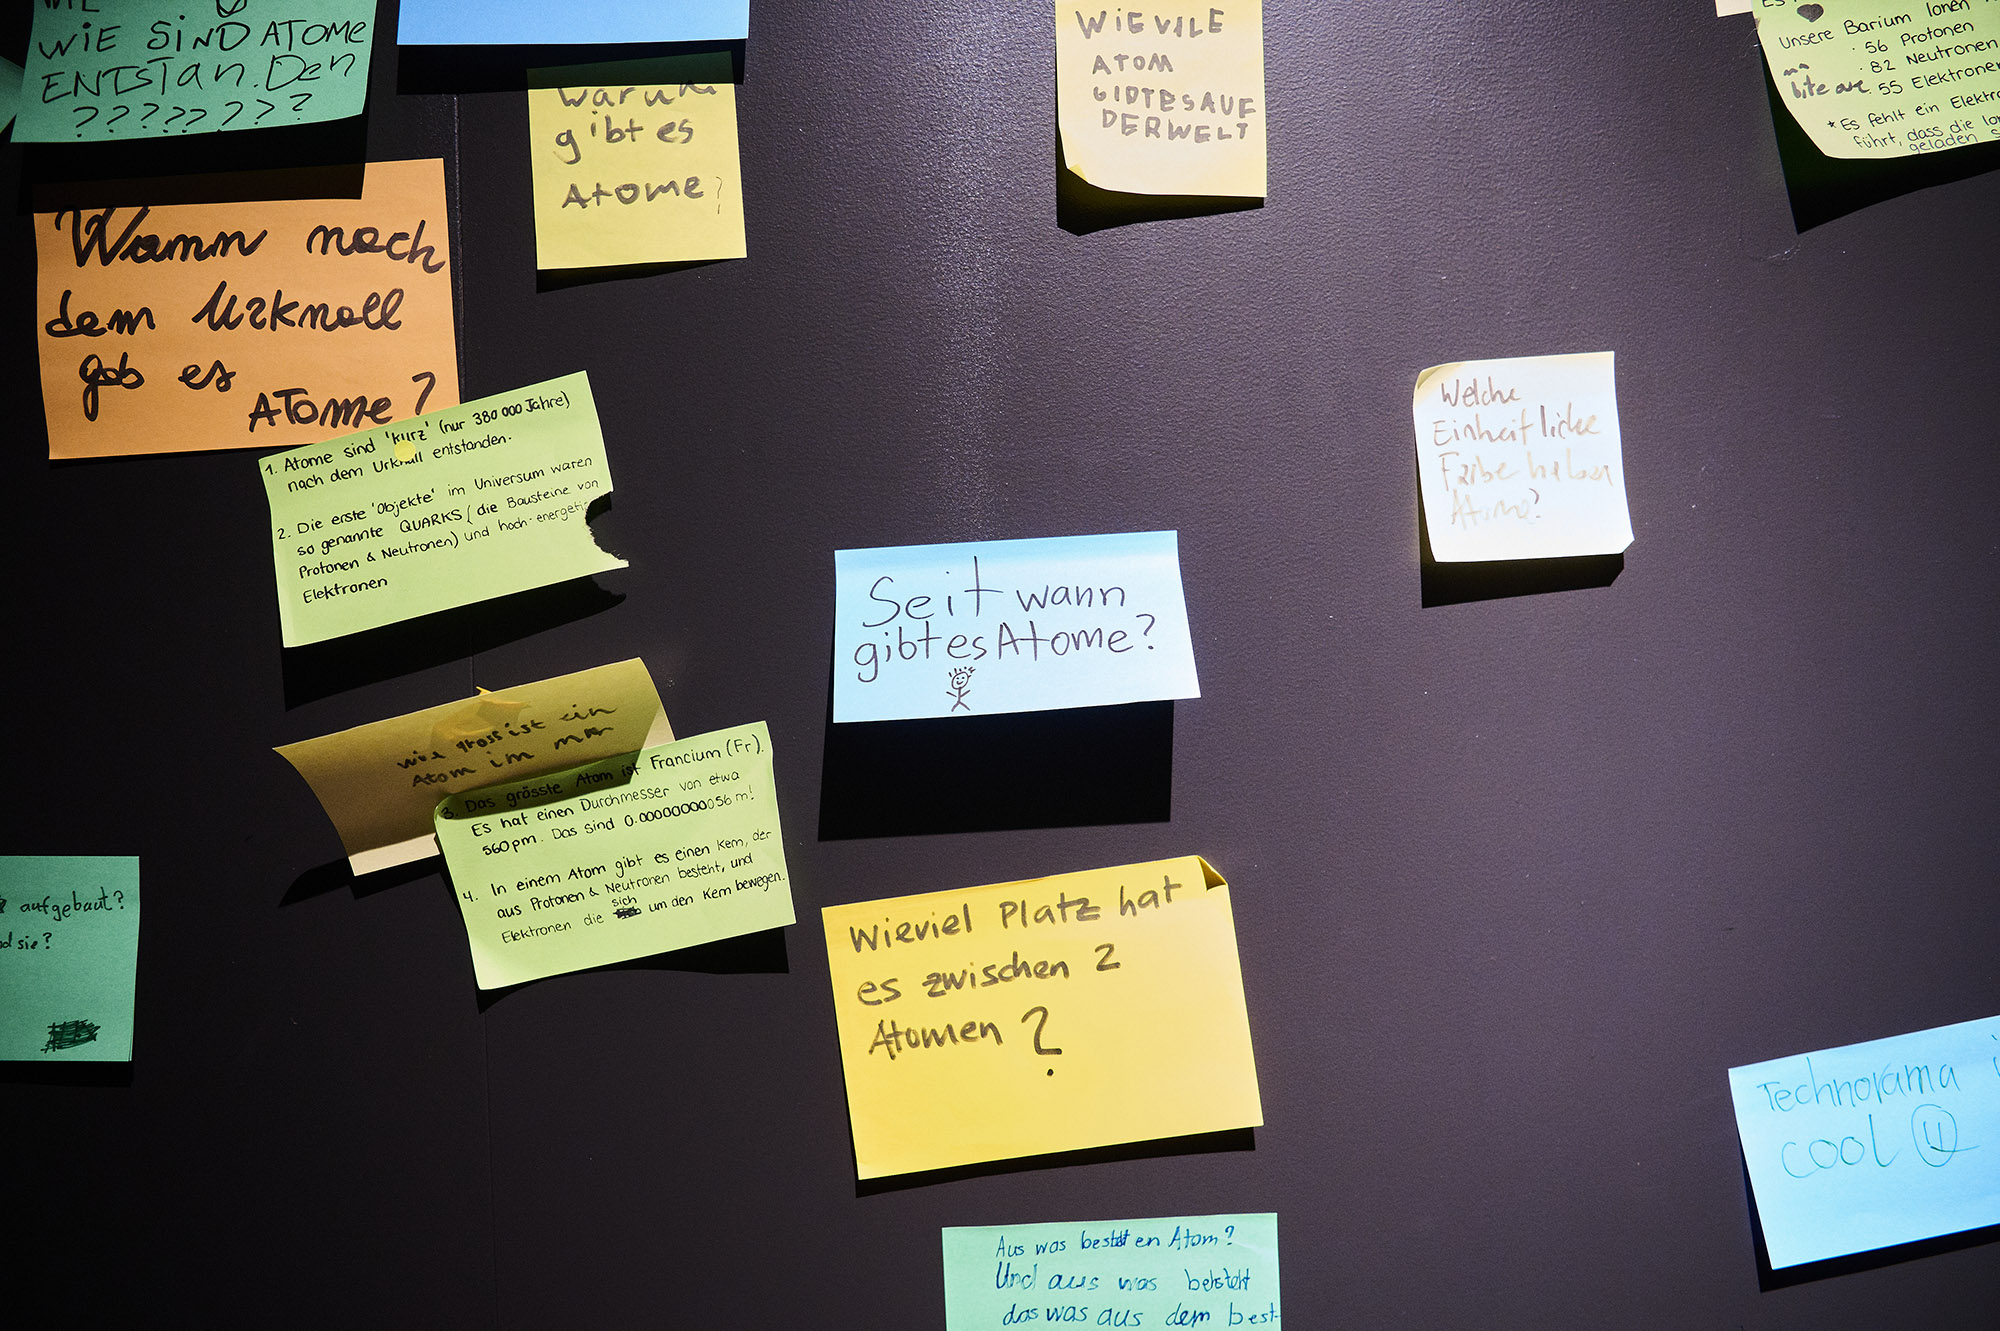 Sticky notes on the feedback wall